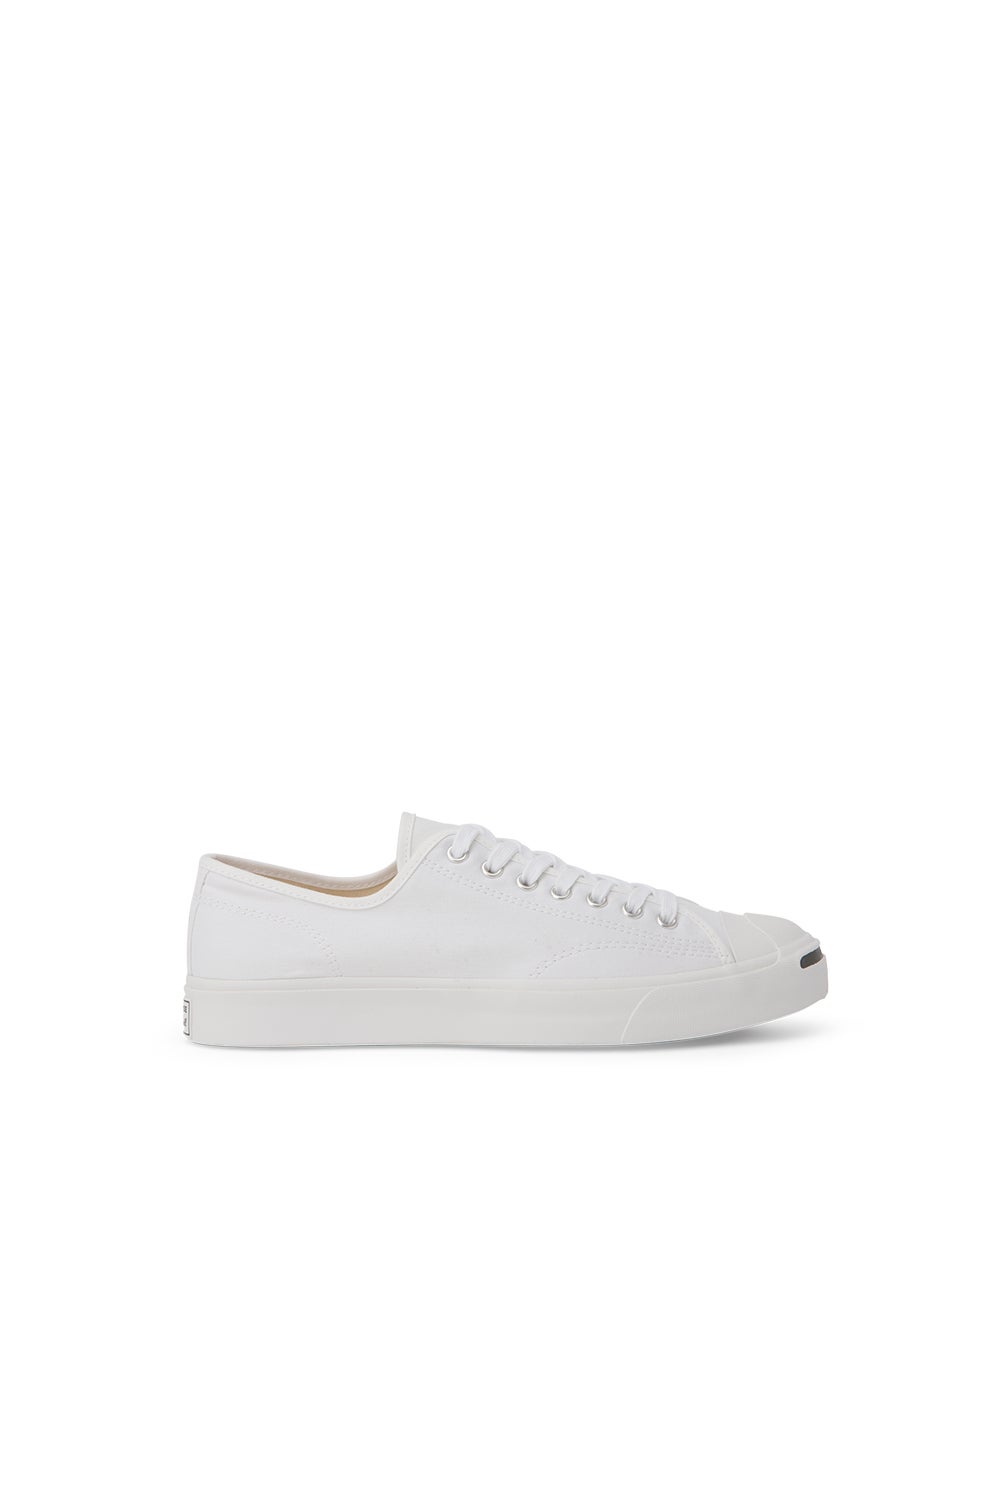 jack purcell first in class low top white